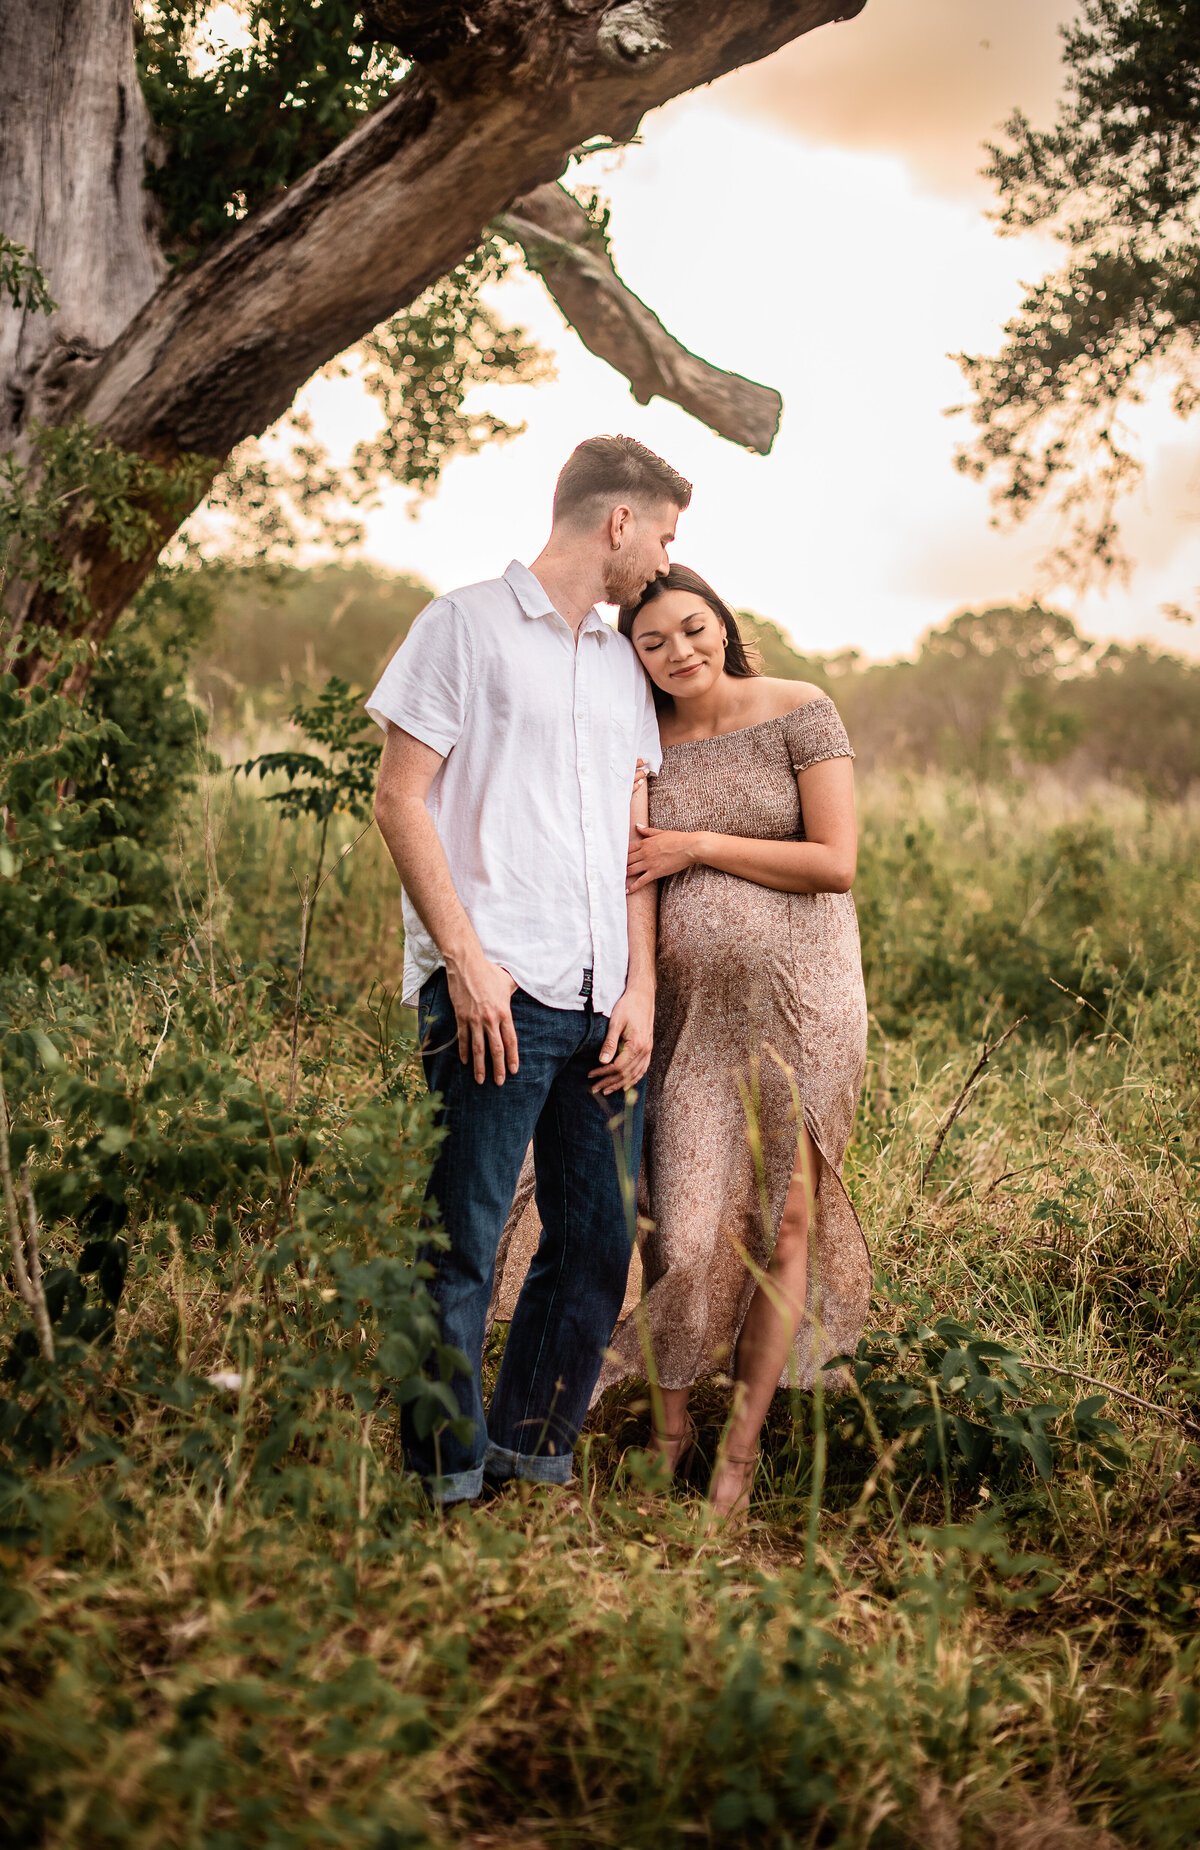 A mom and dad to be from Galveston county stand closely in a field.